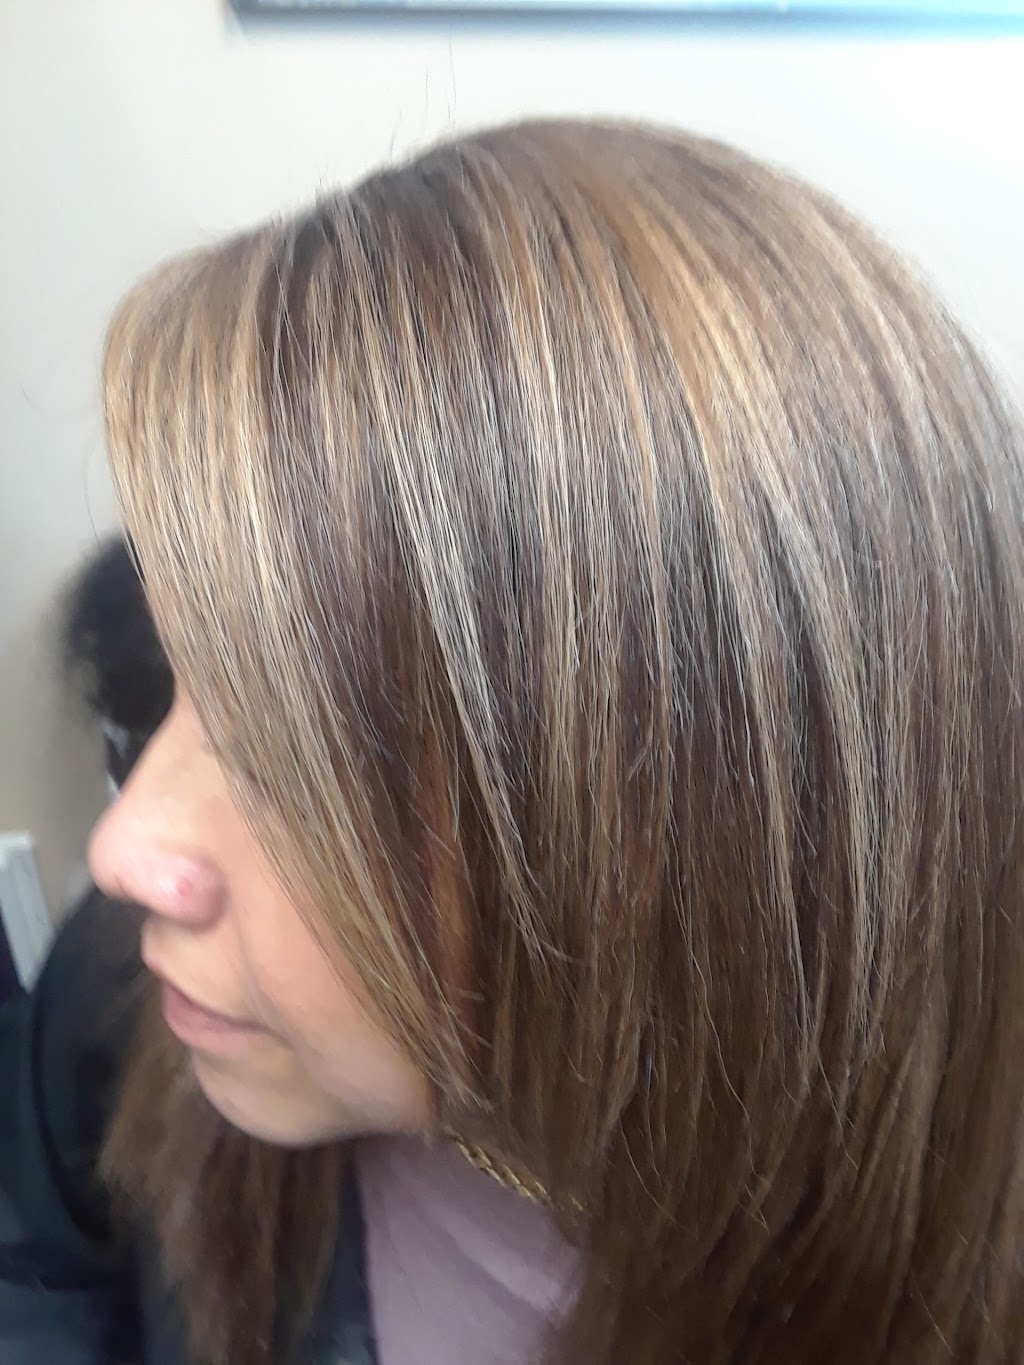 Sophisticated Finish Hair Salon | Salons By JC, 876 Sunrise Hwy Suite 11, Bay Shore, NY 11706 | Phone: (631) 561-9861